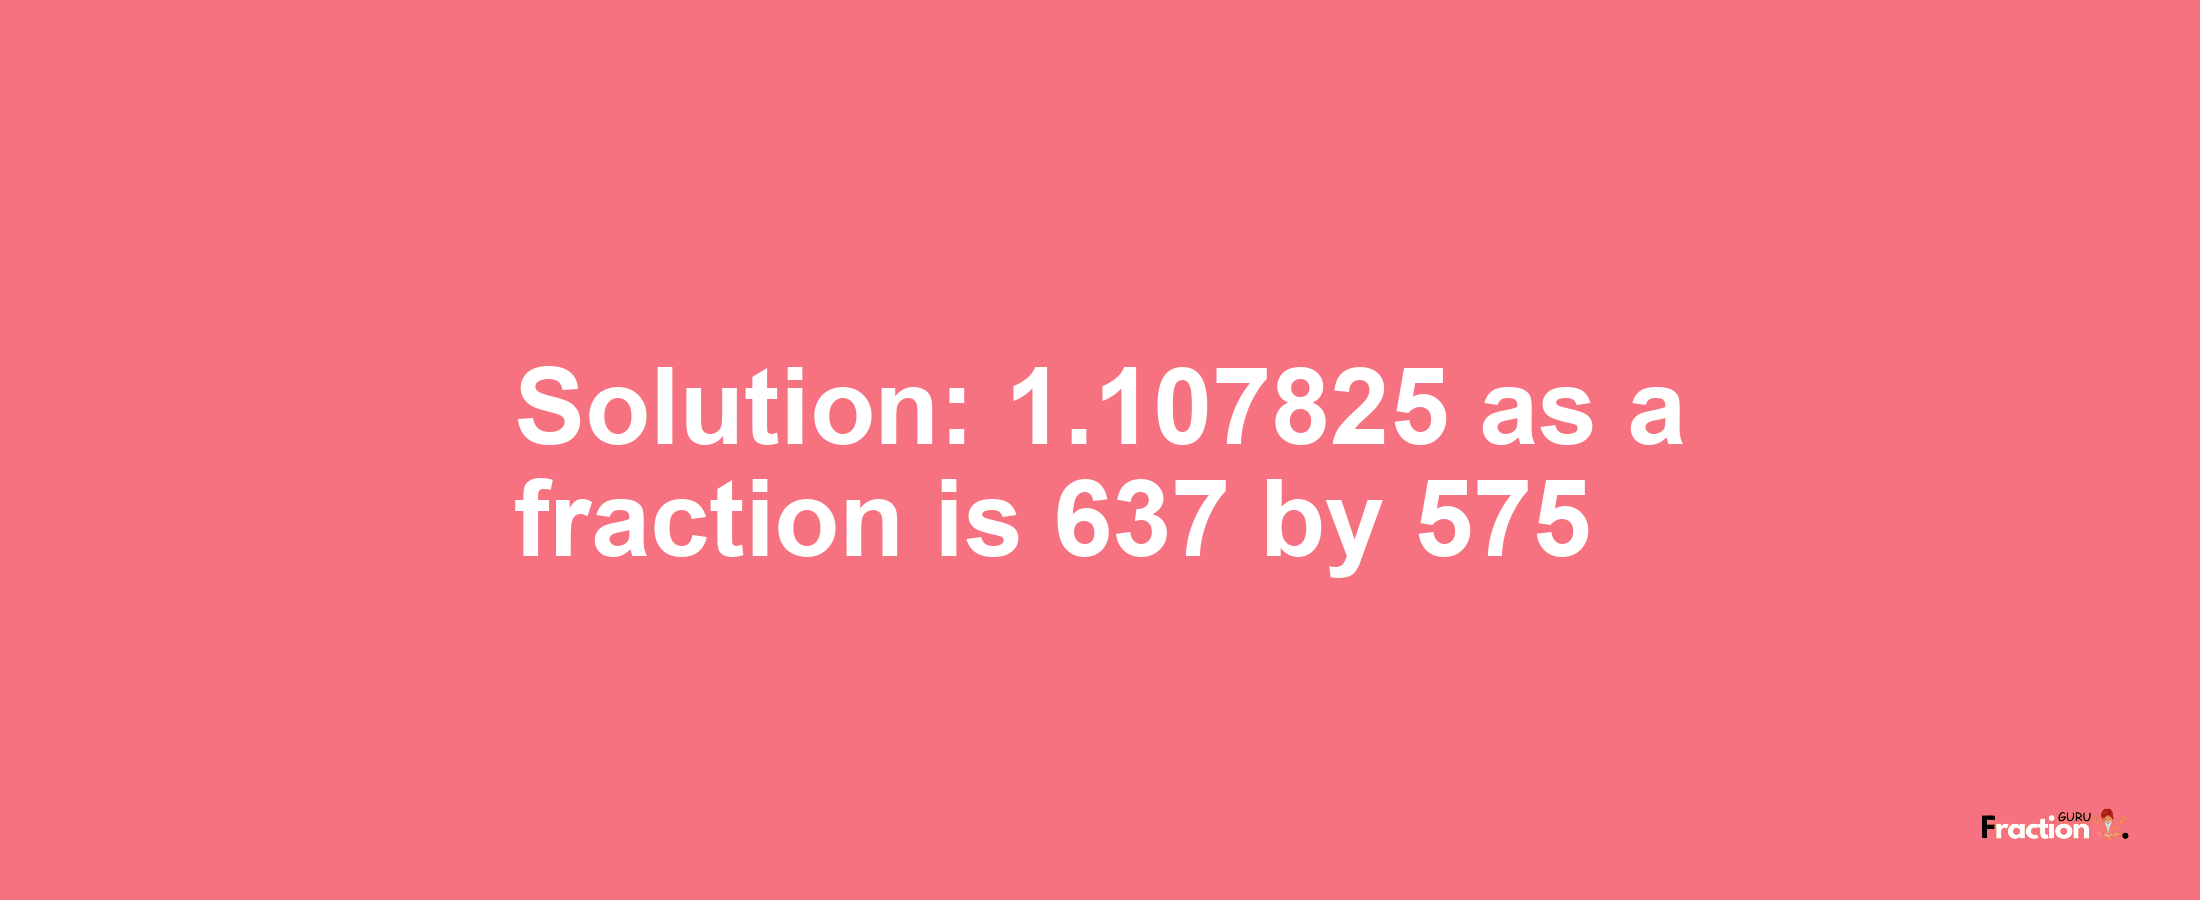 Solution:1.107825 as a fraction is 637/575